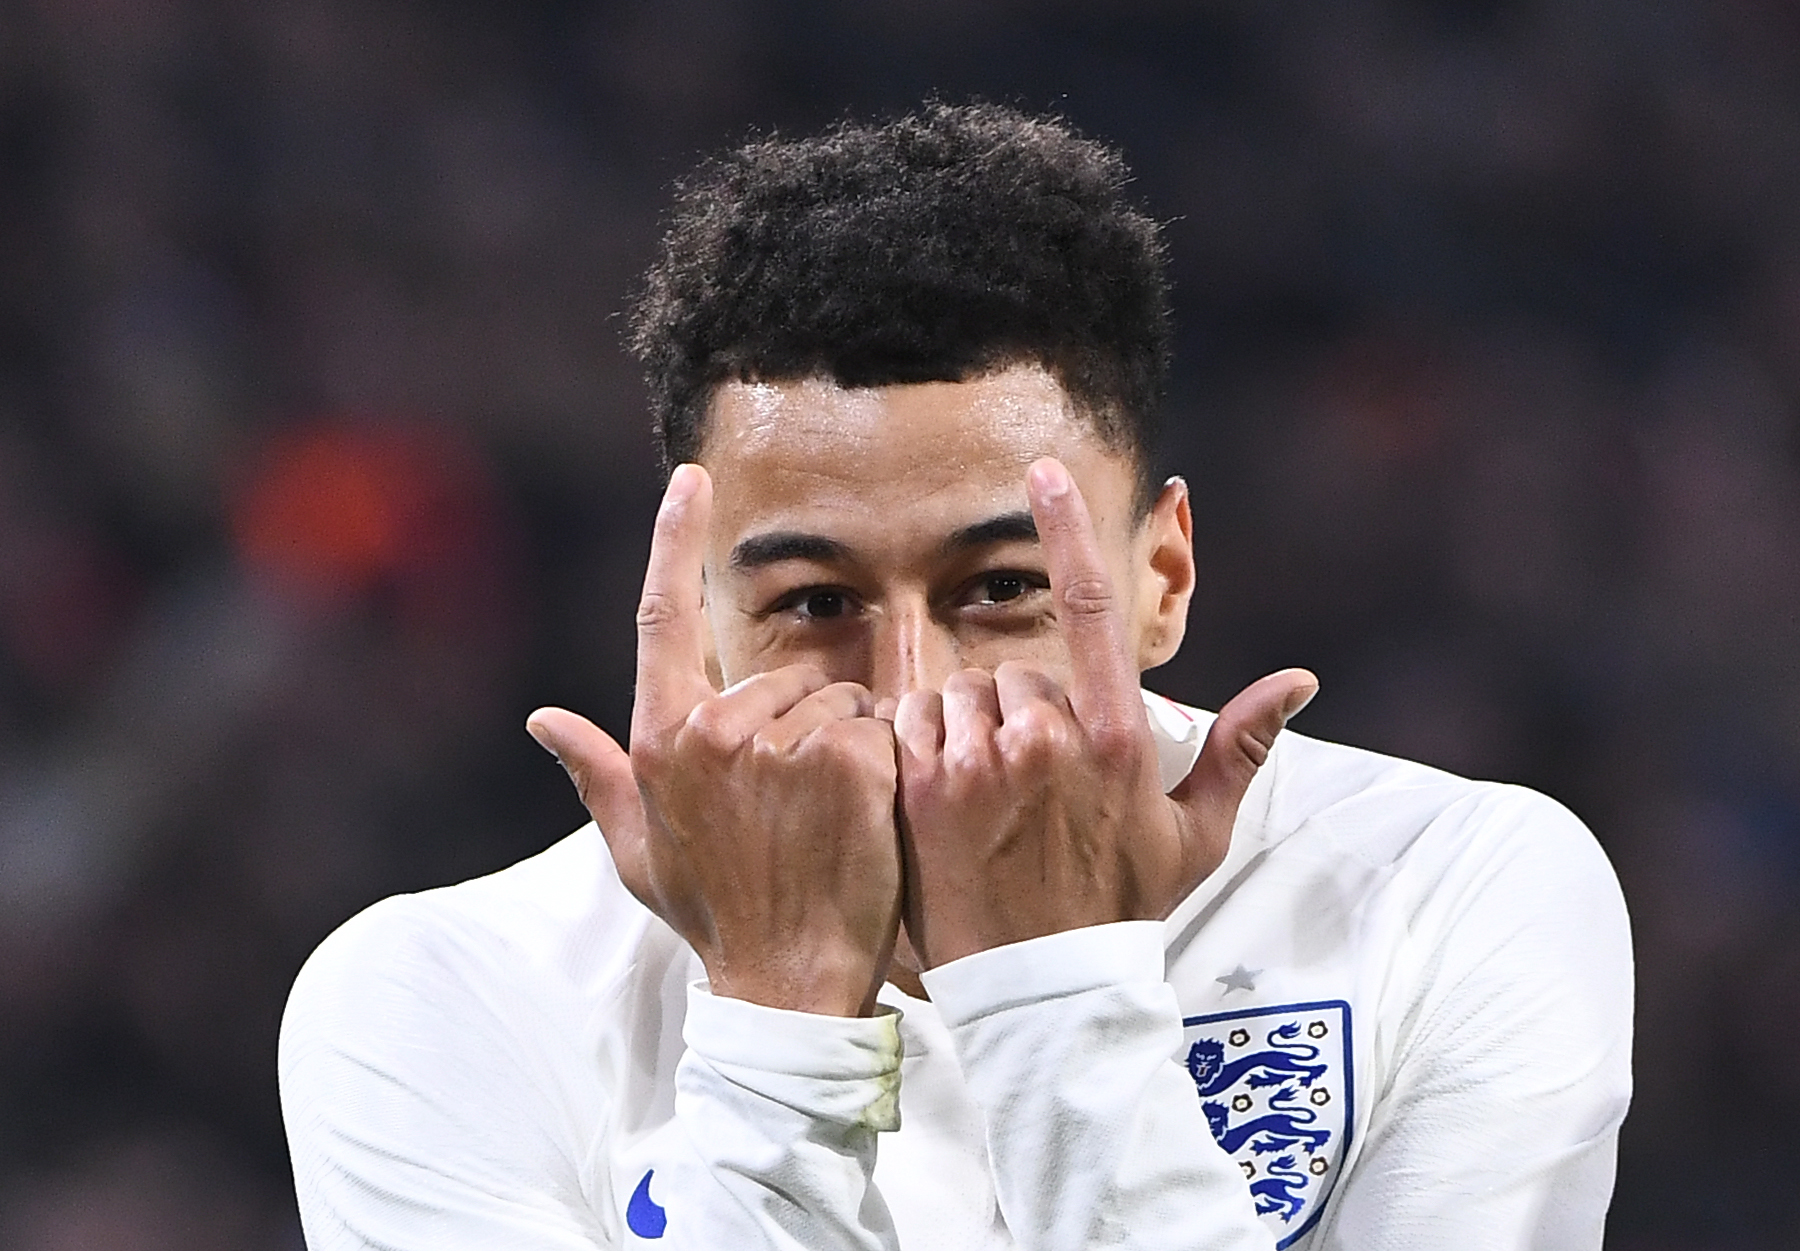 English player Jesse Lingard celebrates after scoring during a friendly football match between the Netherlands and England at the Amsterdam Arena in Amsterdam on March 23, 2018.   / AFP PHOTO / Emmanuel DUNAND        (Photo credit should read EMMANUEL DUNAND/AFP/Getty Images)